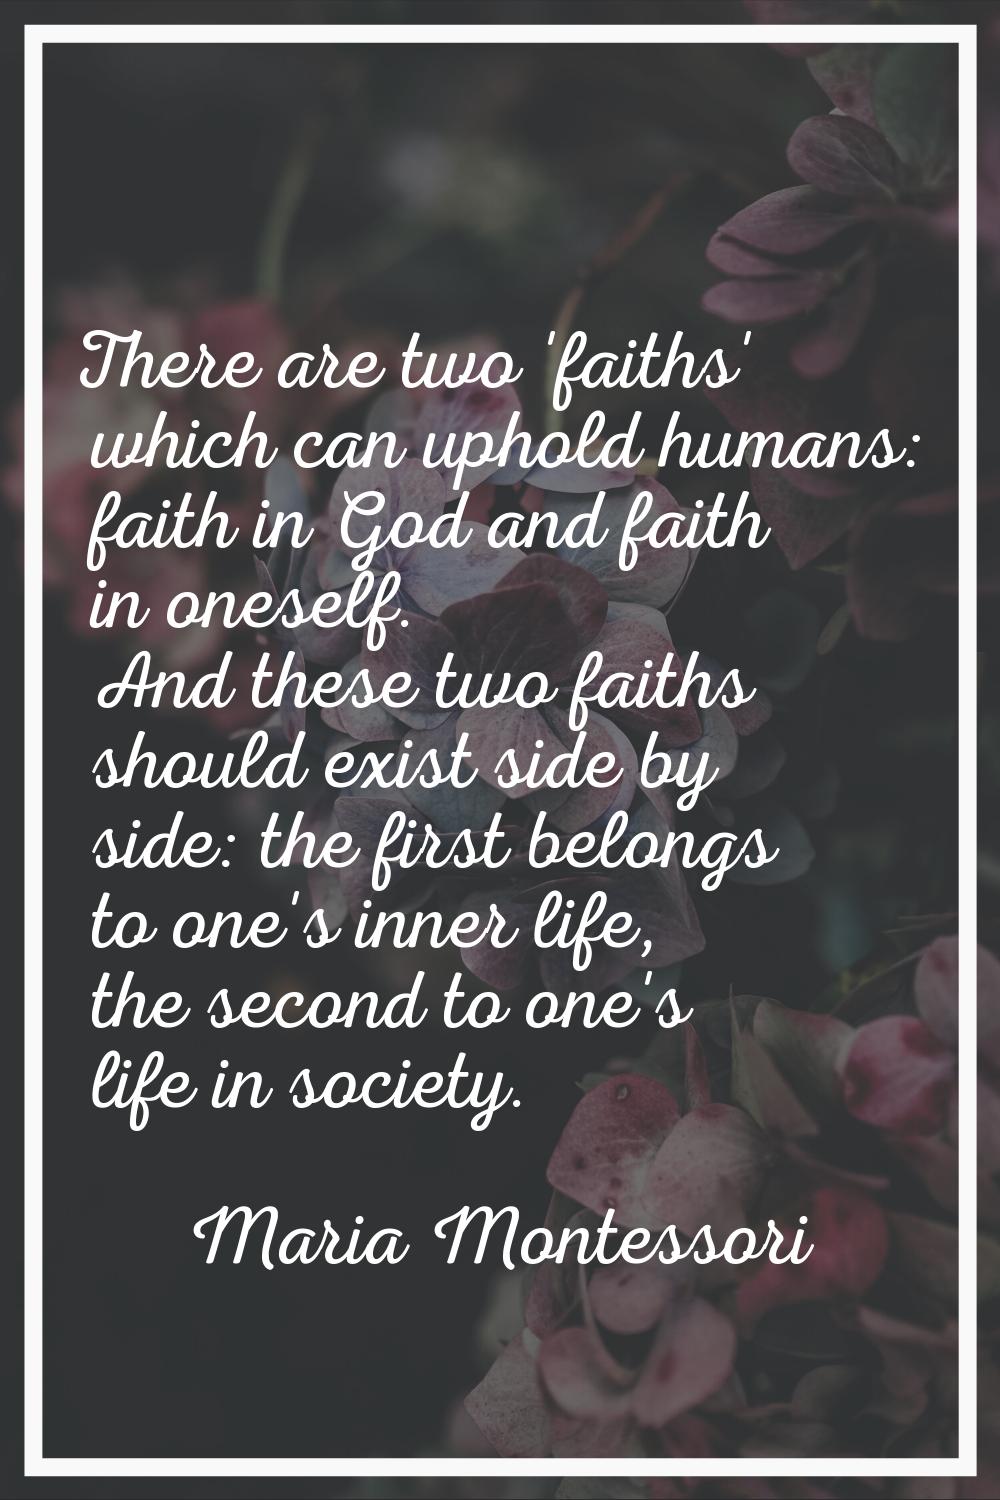 There are two 'faiths' which can uphold humans: faith in God and faith in oneself. And these two fa